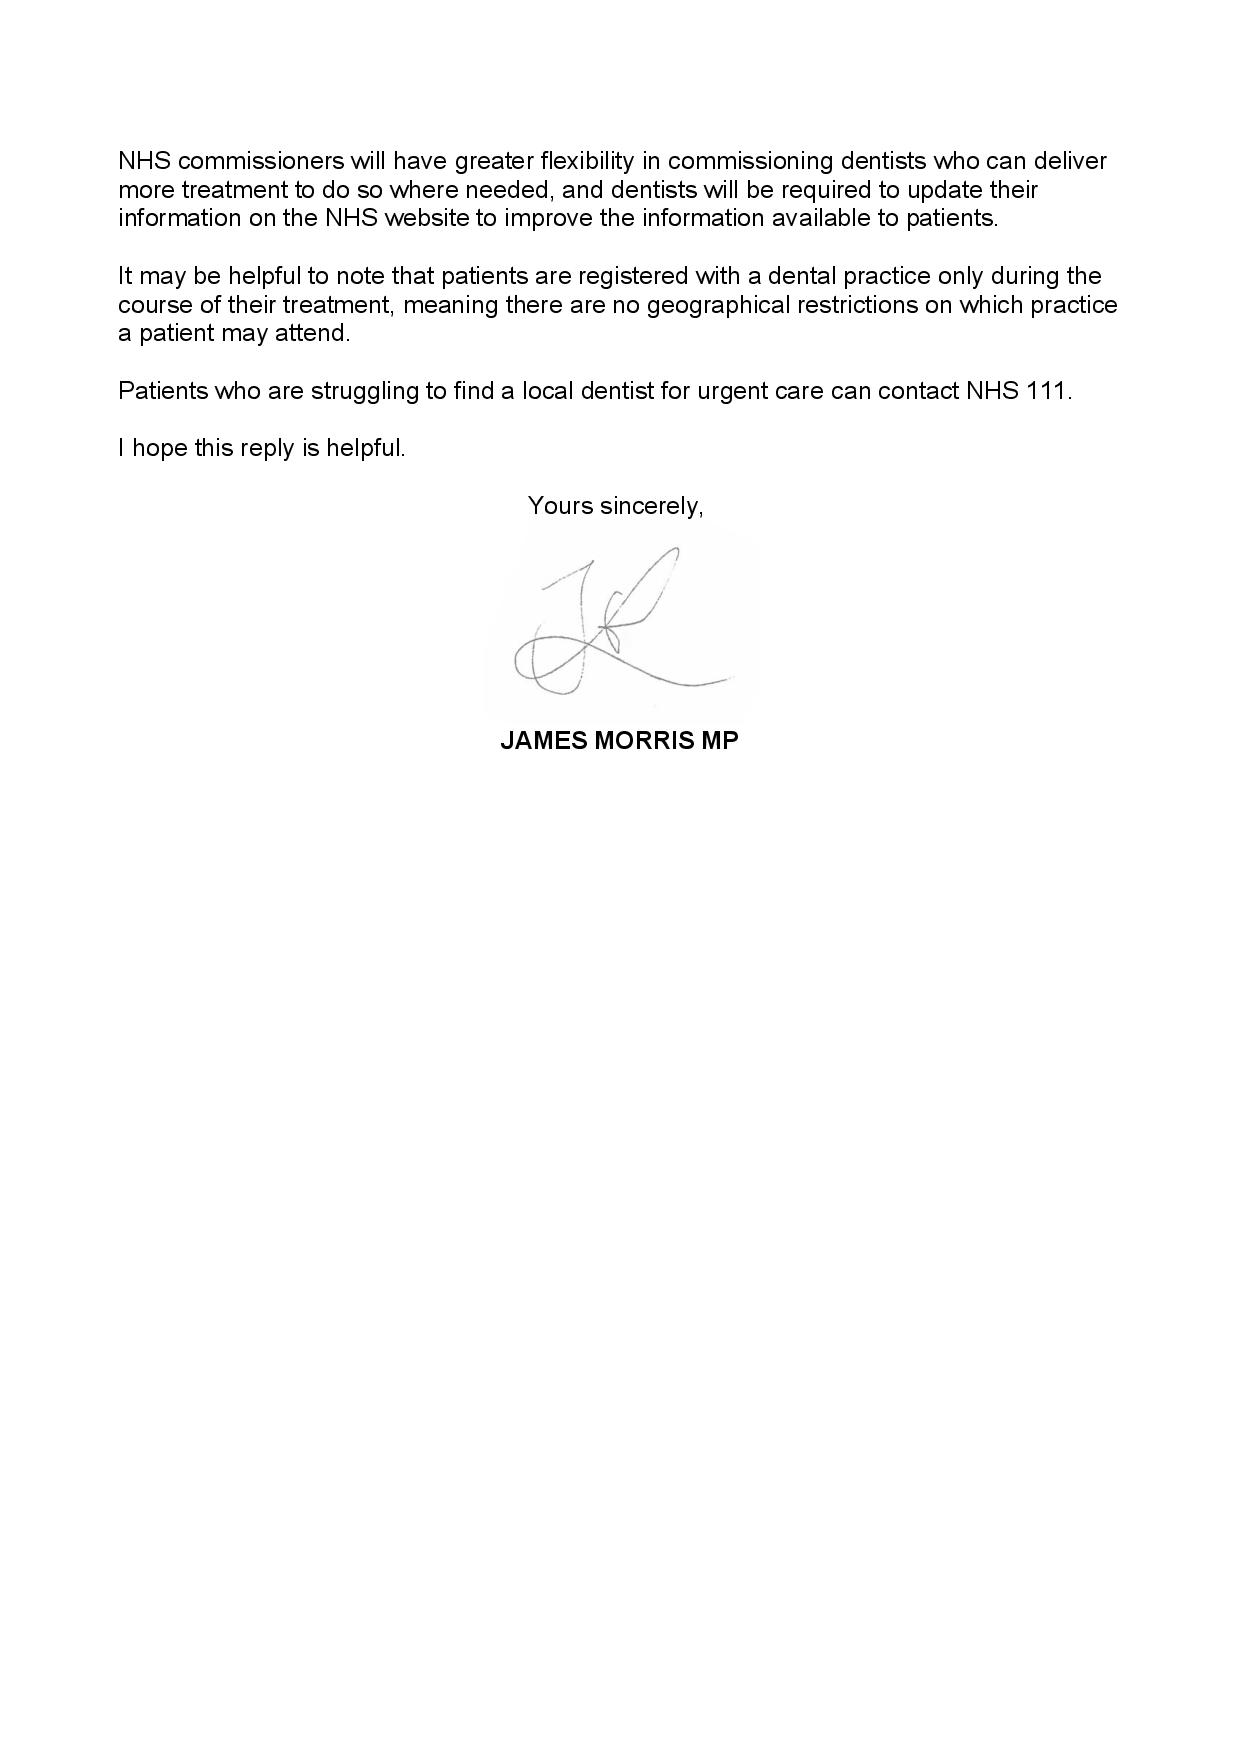 James Morris MP reply re. Dentists August 2022-page-002.jpg